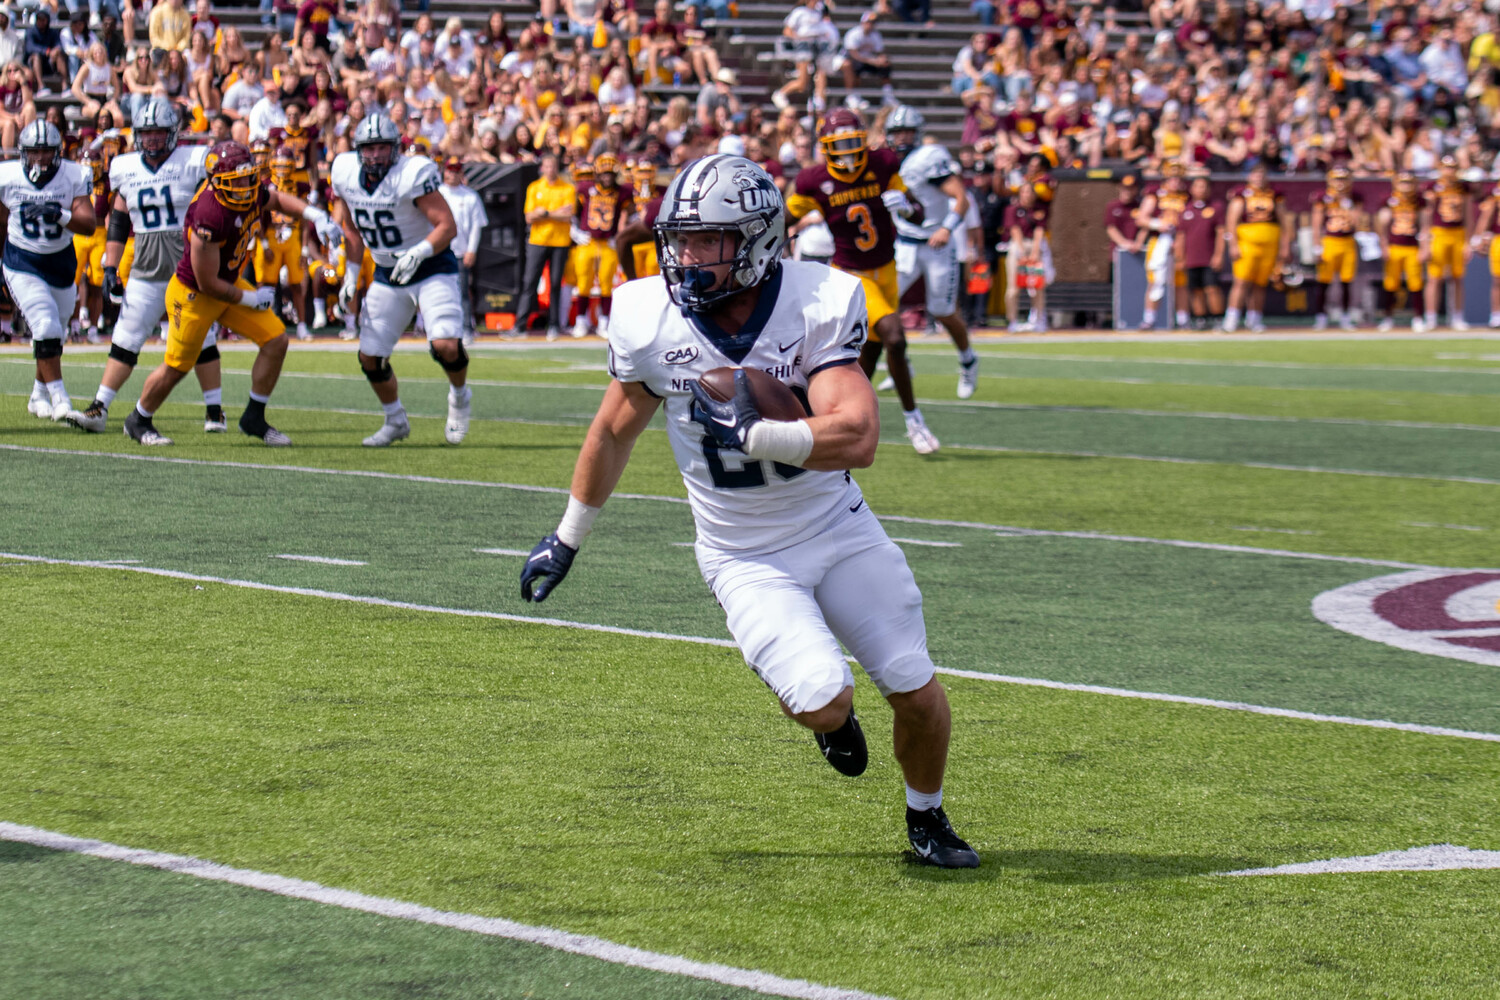 University of New Hampshire senior running back Dylan Laube is the national leader in all-purpose yards for the second consecutive year with an average of 209.5 yards per game. UNIVERSITY OF NEW HAMPSHIRE ATHLETICS